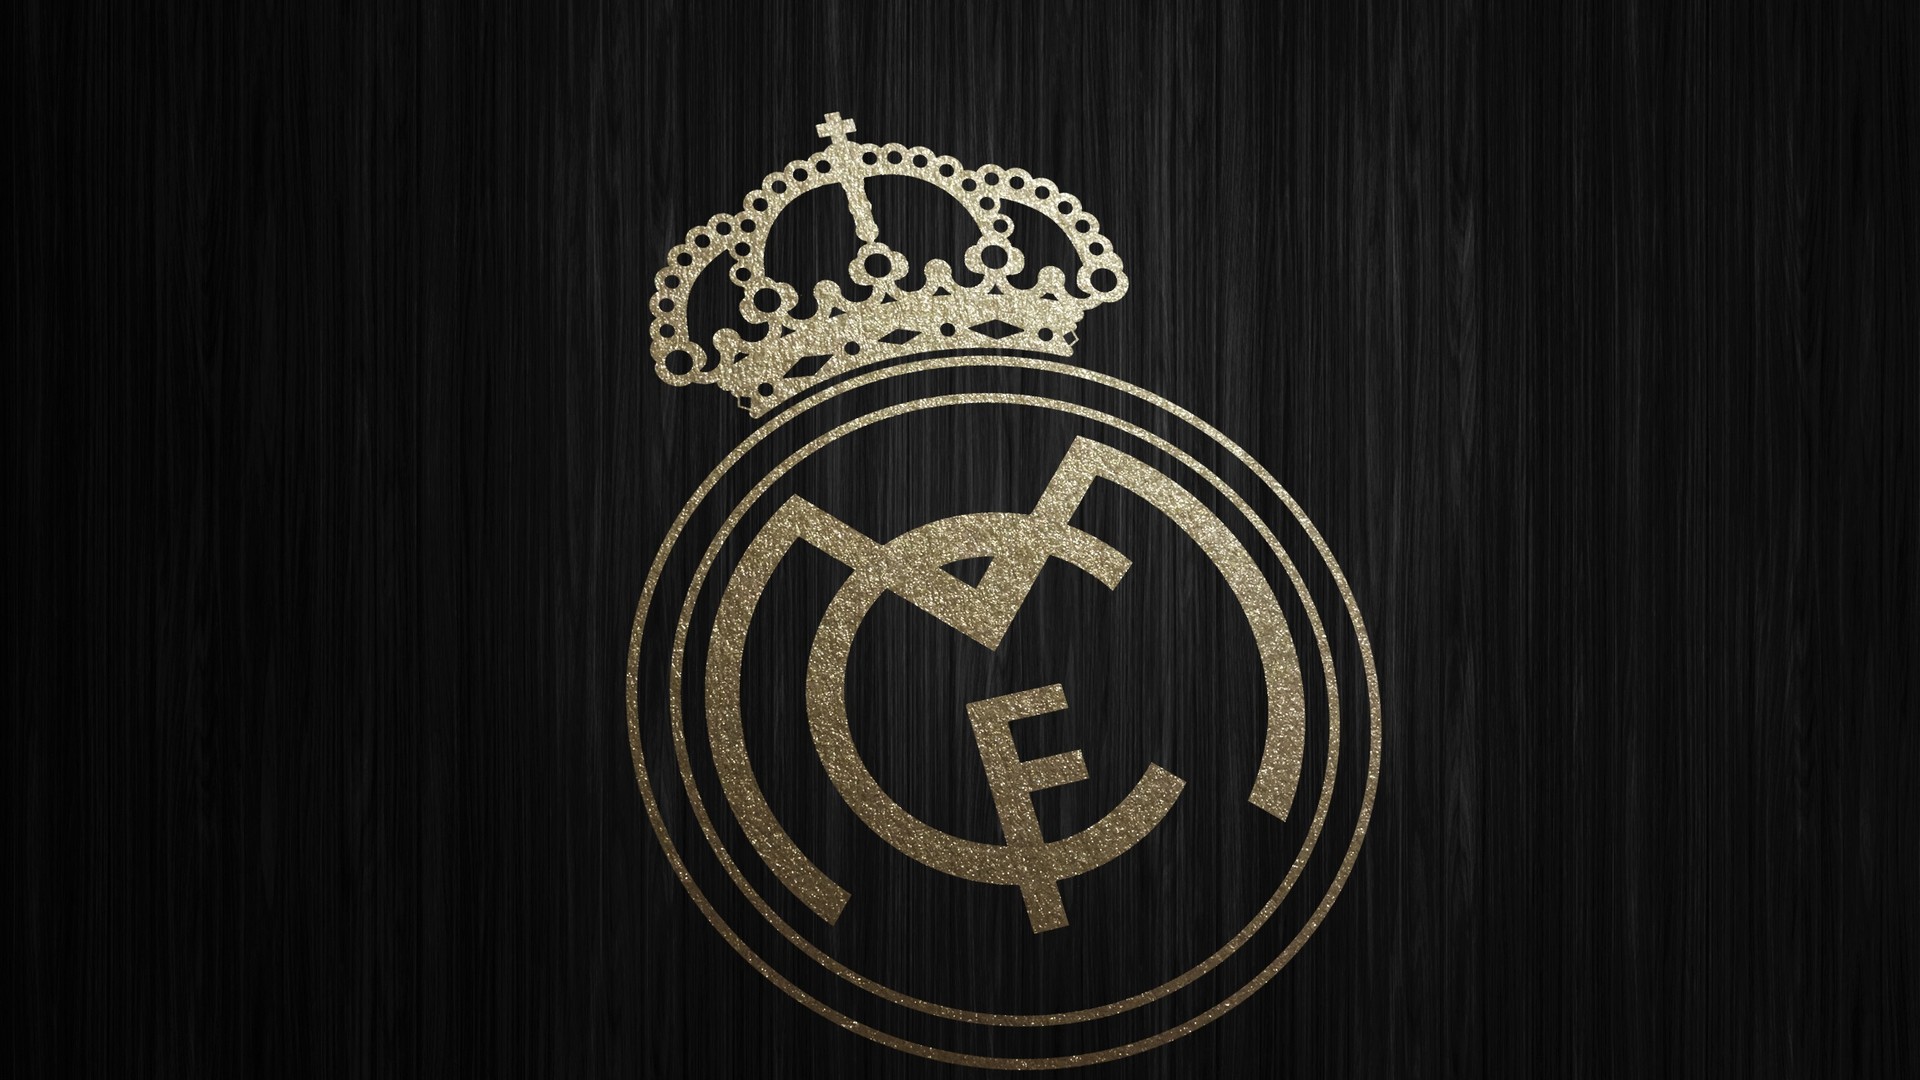 Wallpapers HD Real Madrid With Resolution 1920X1080 pixel. You can make this wallpaper for your Mac or Windows Desktop Background, iPhone, Android or Tablet and another Smartphone device for free